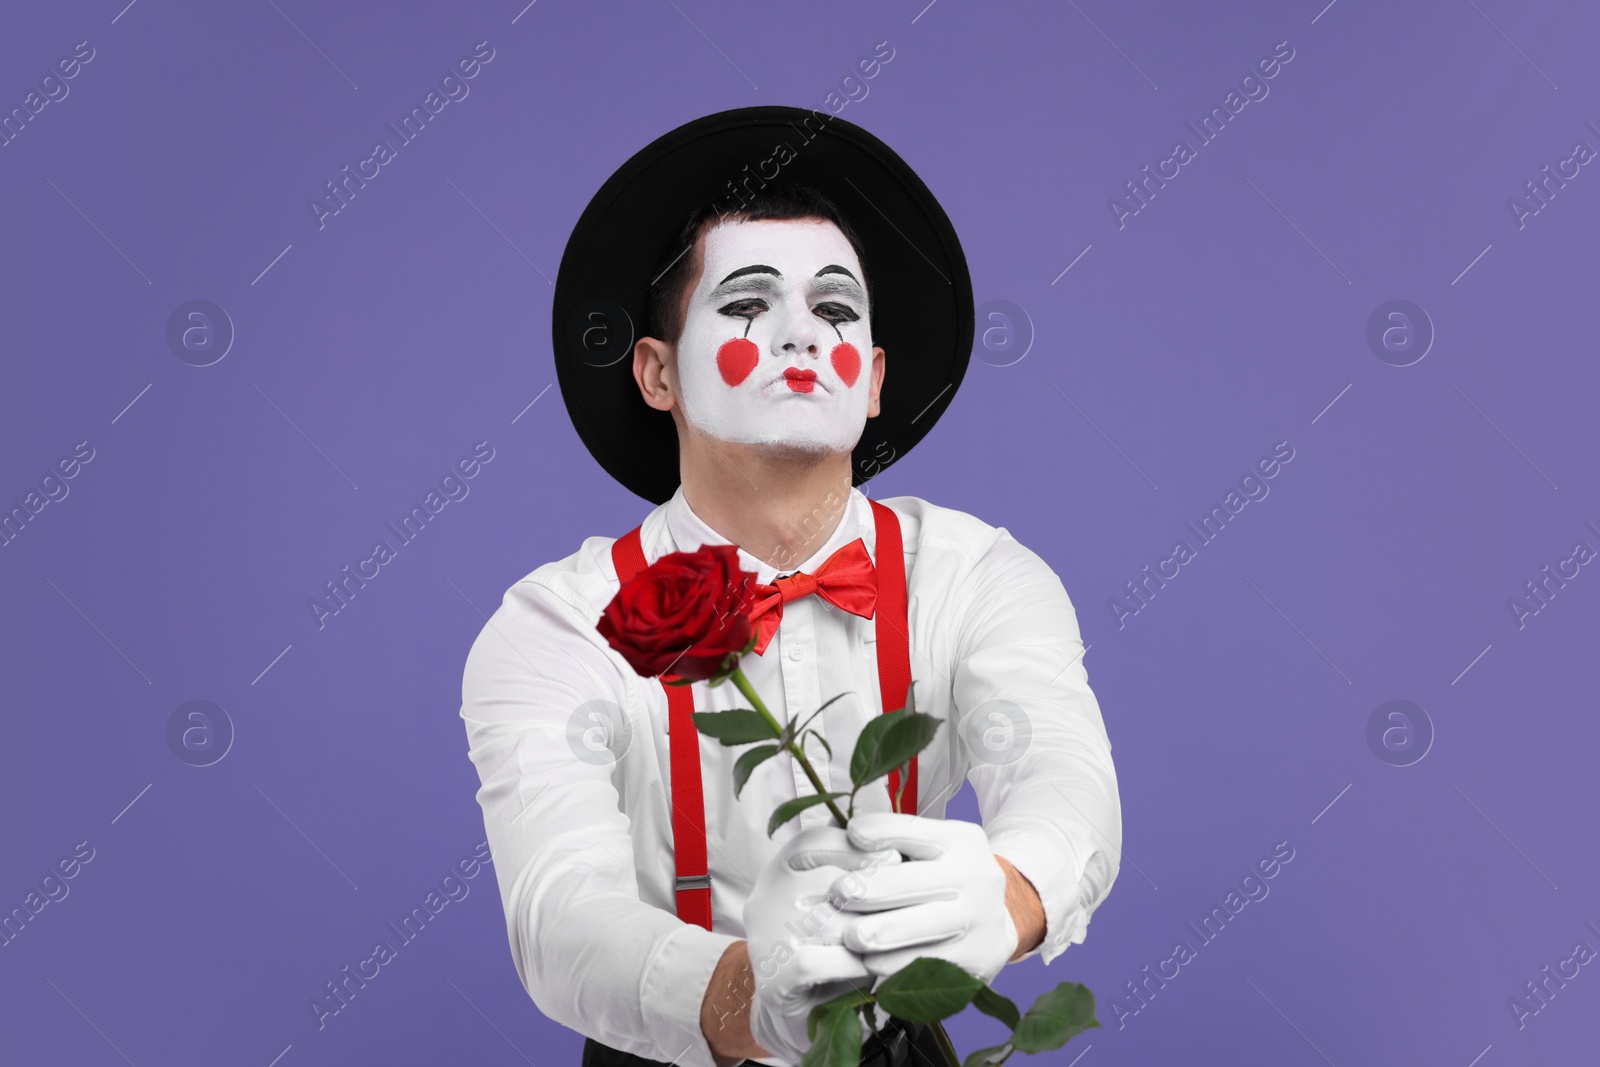 Photo of Funny mime artist with red rose on purple background